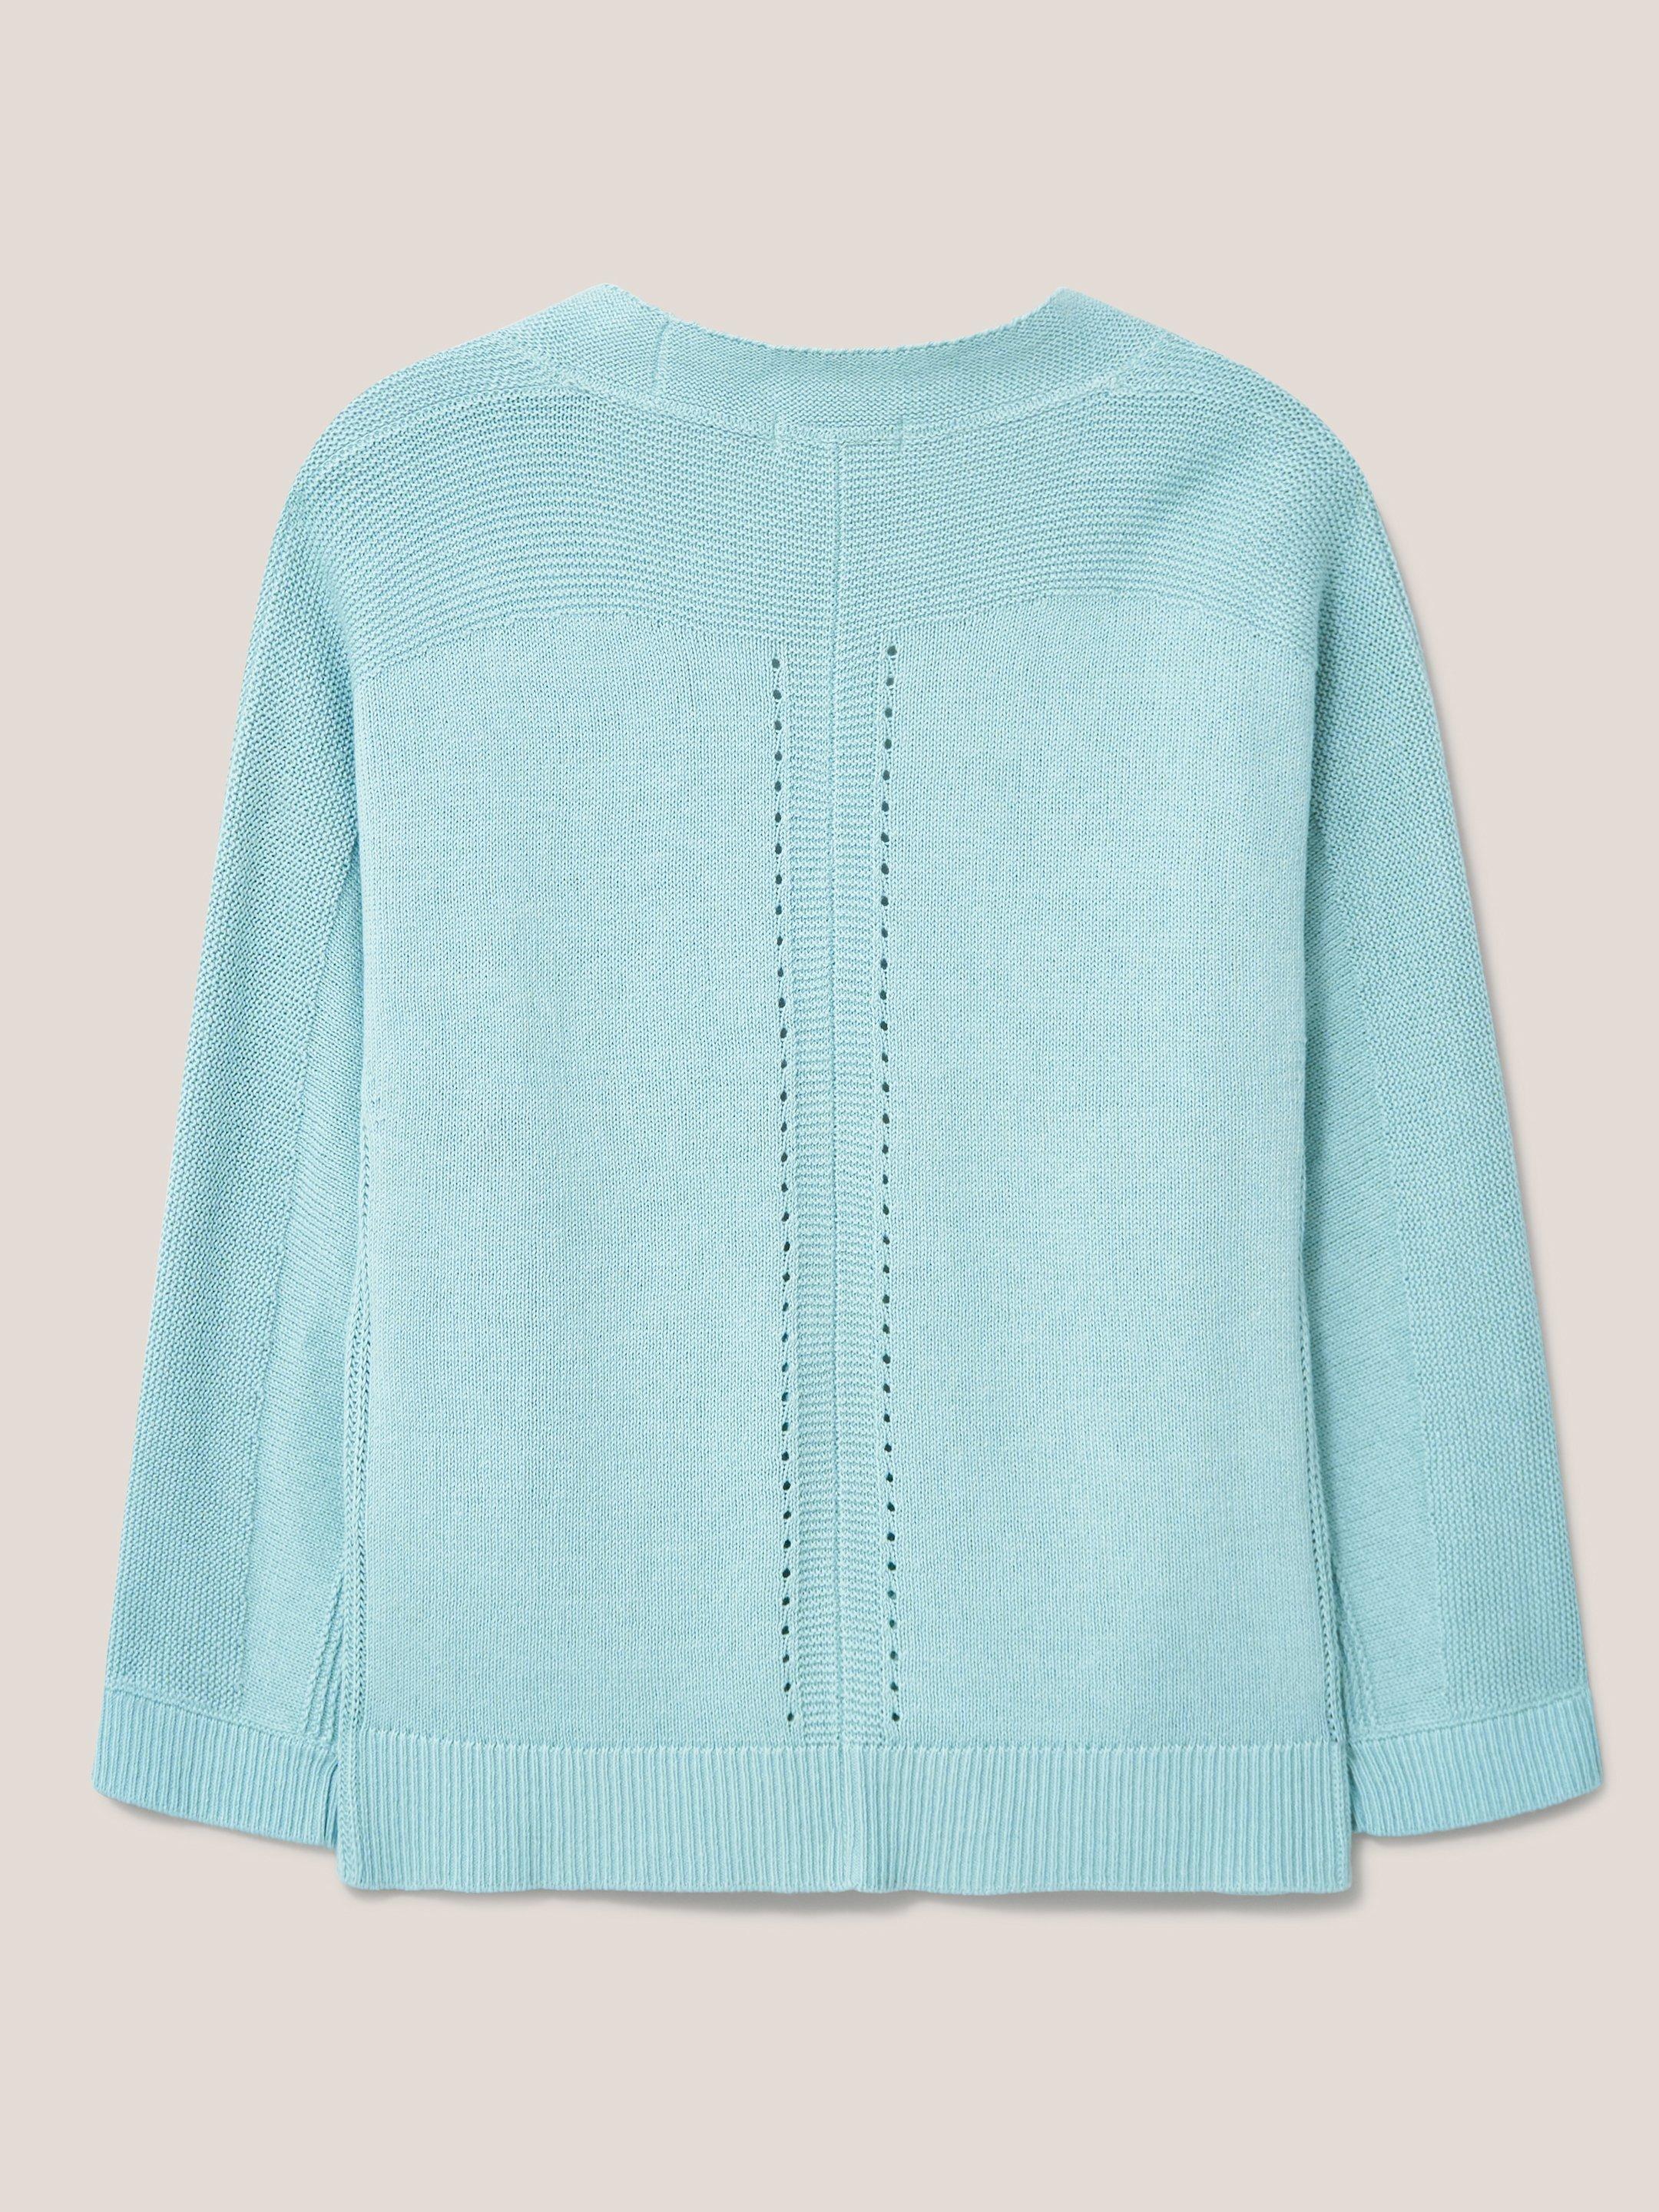 Tiana Open Neck Cardi in LGT TEAL - FLAT BACK